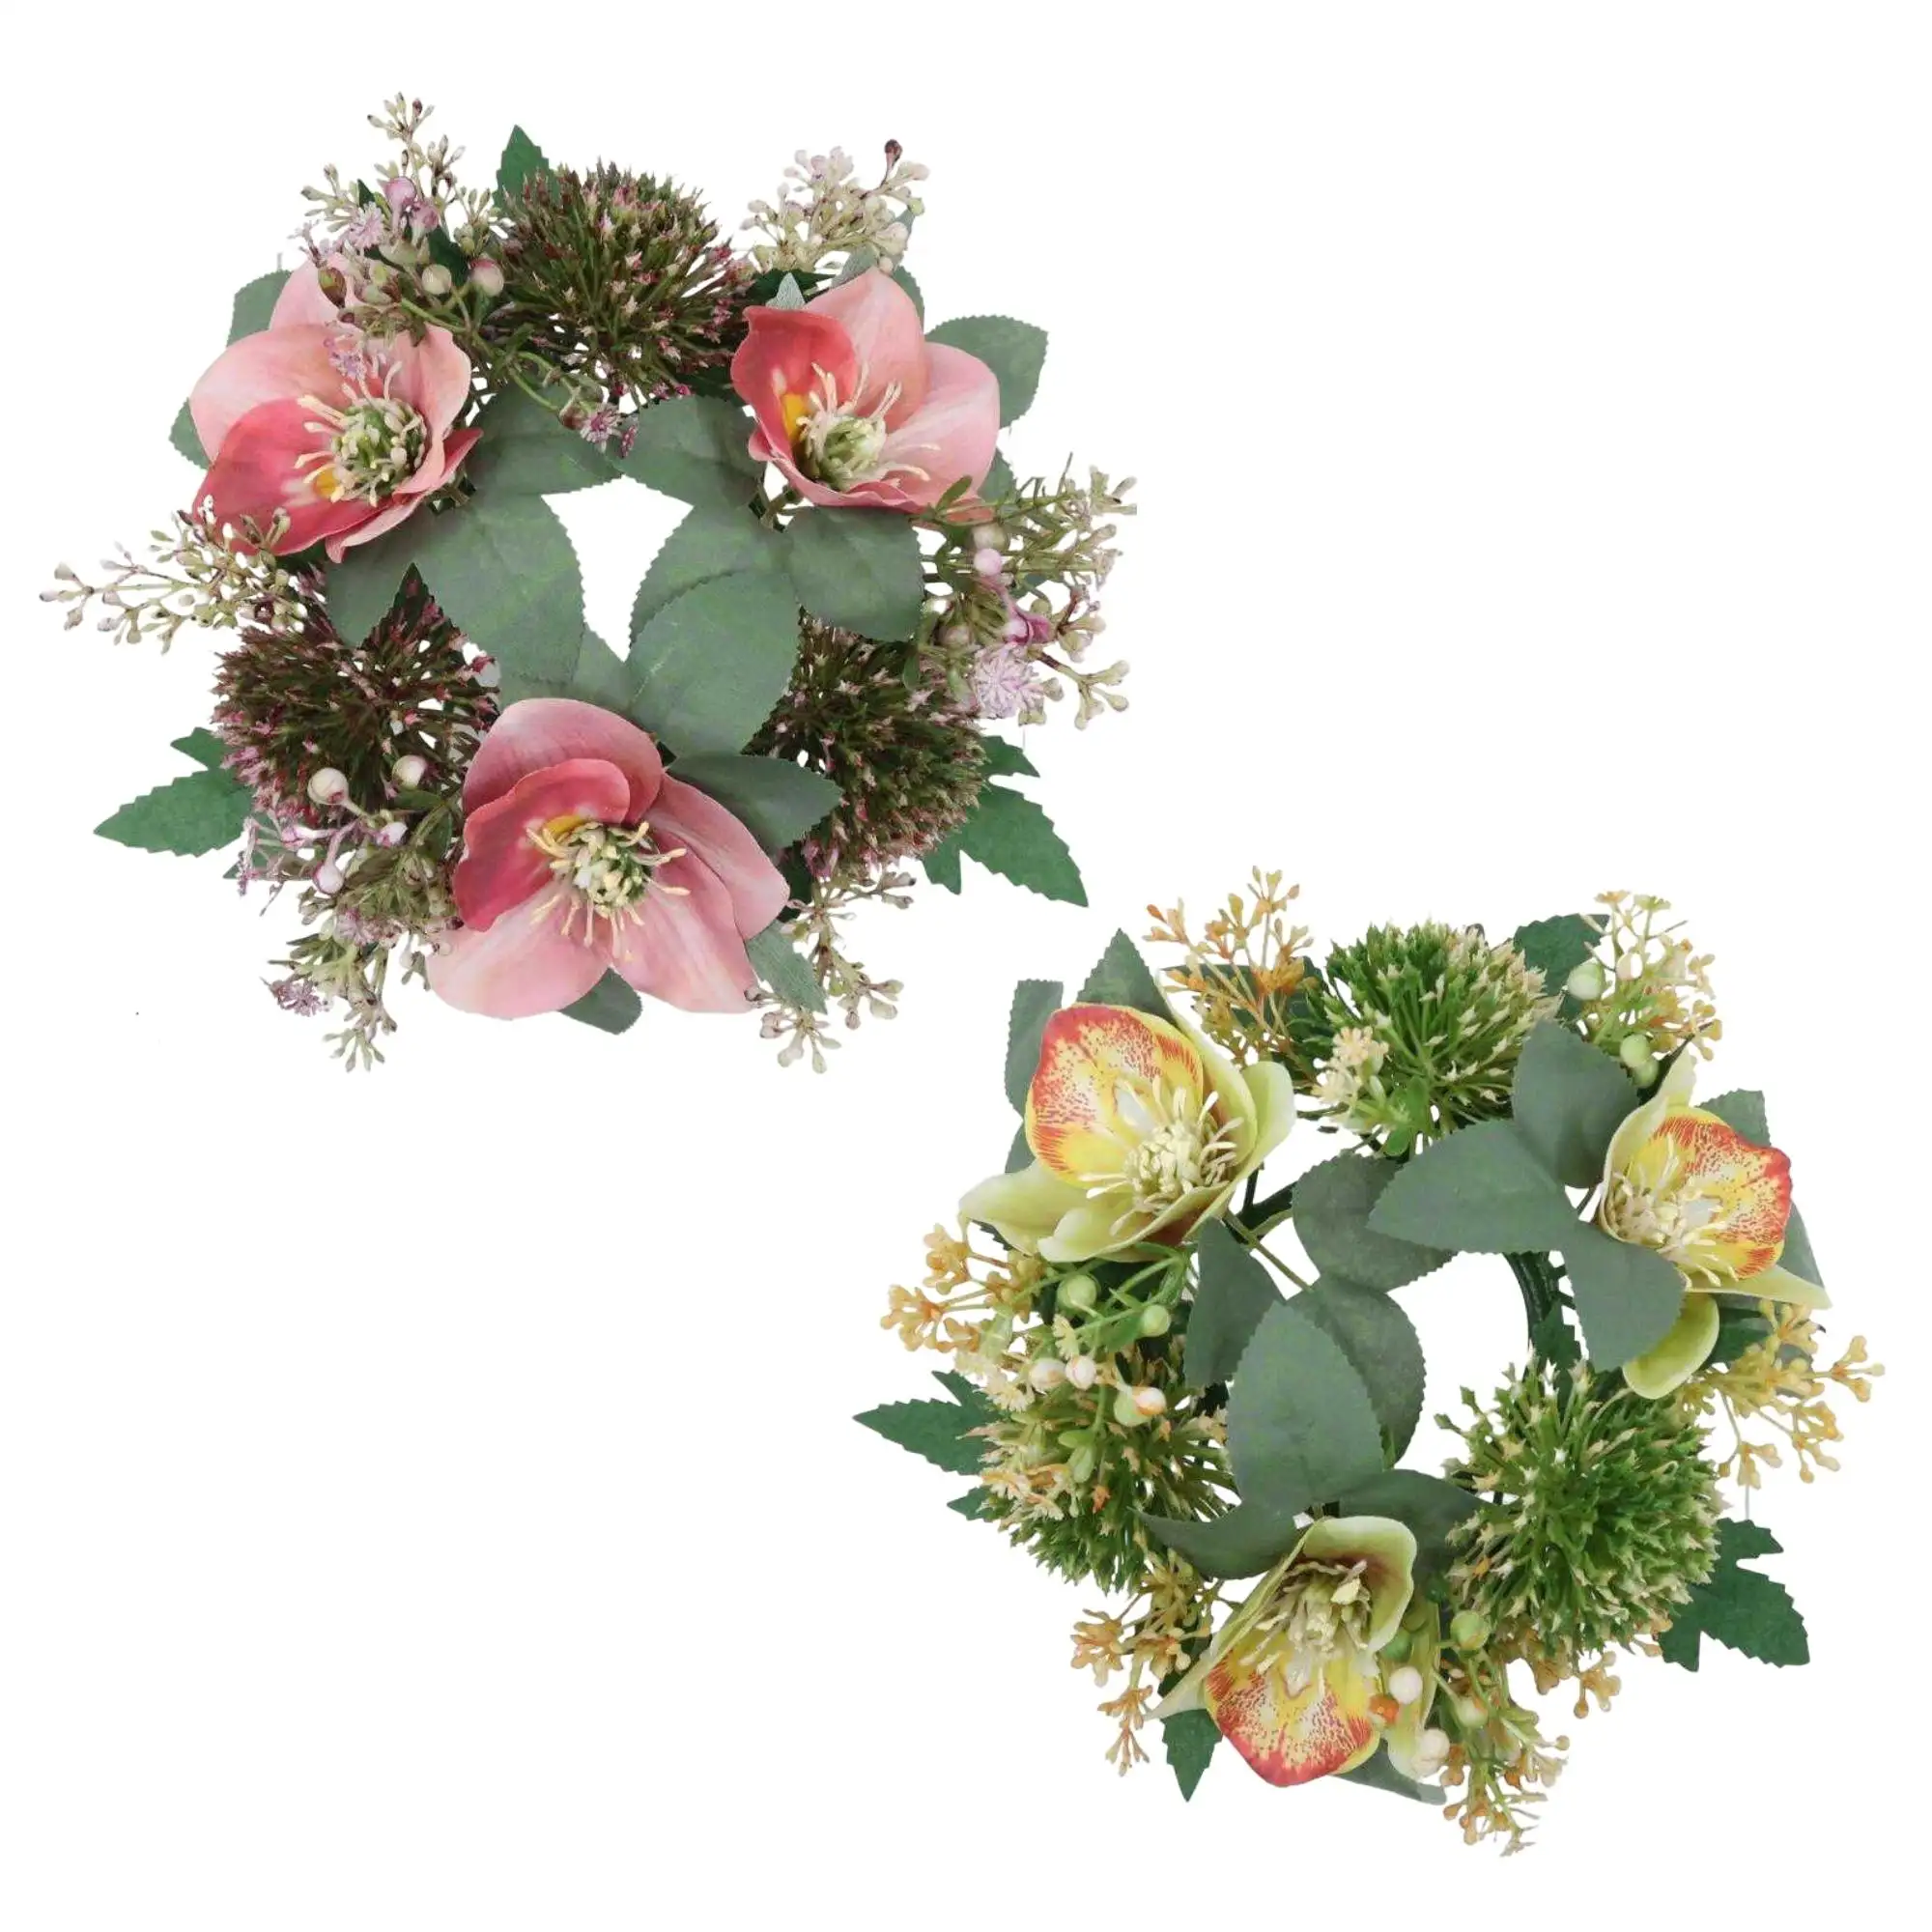 Wedding Hot Selling Wedding Decoration Mixed Helleborus With Foliage Aritificial Candle Ring Wreath For Home Decor